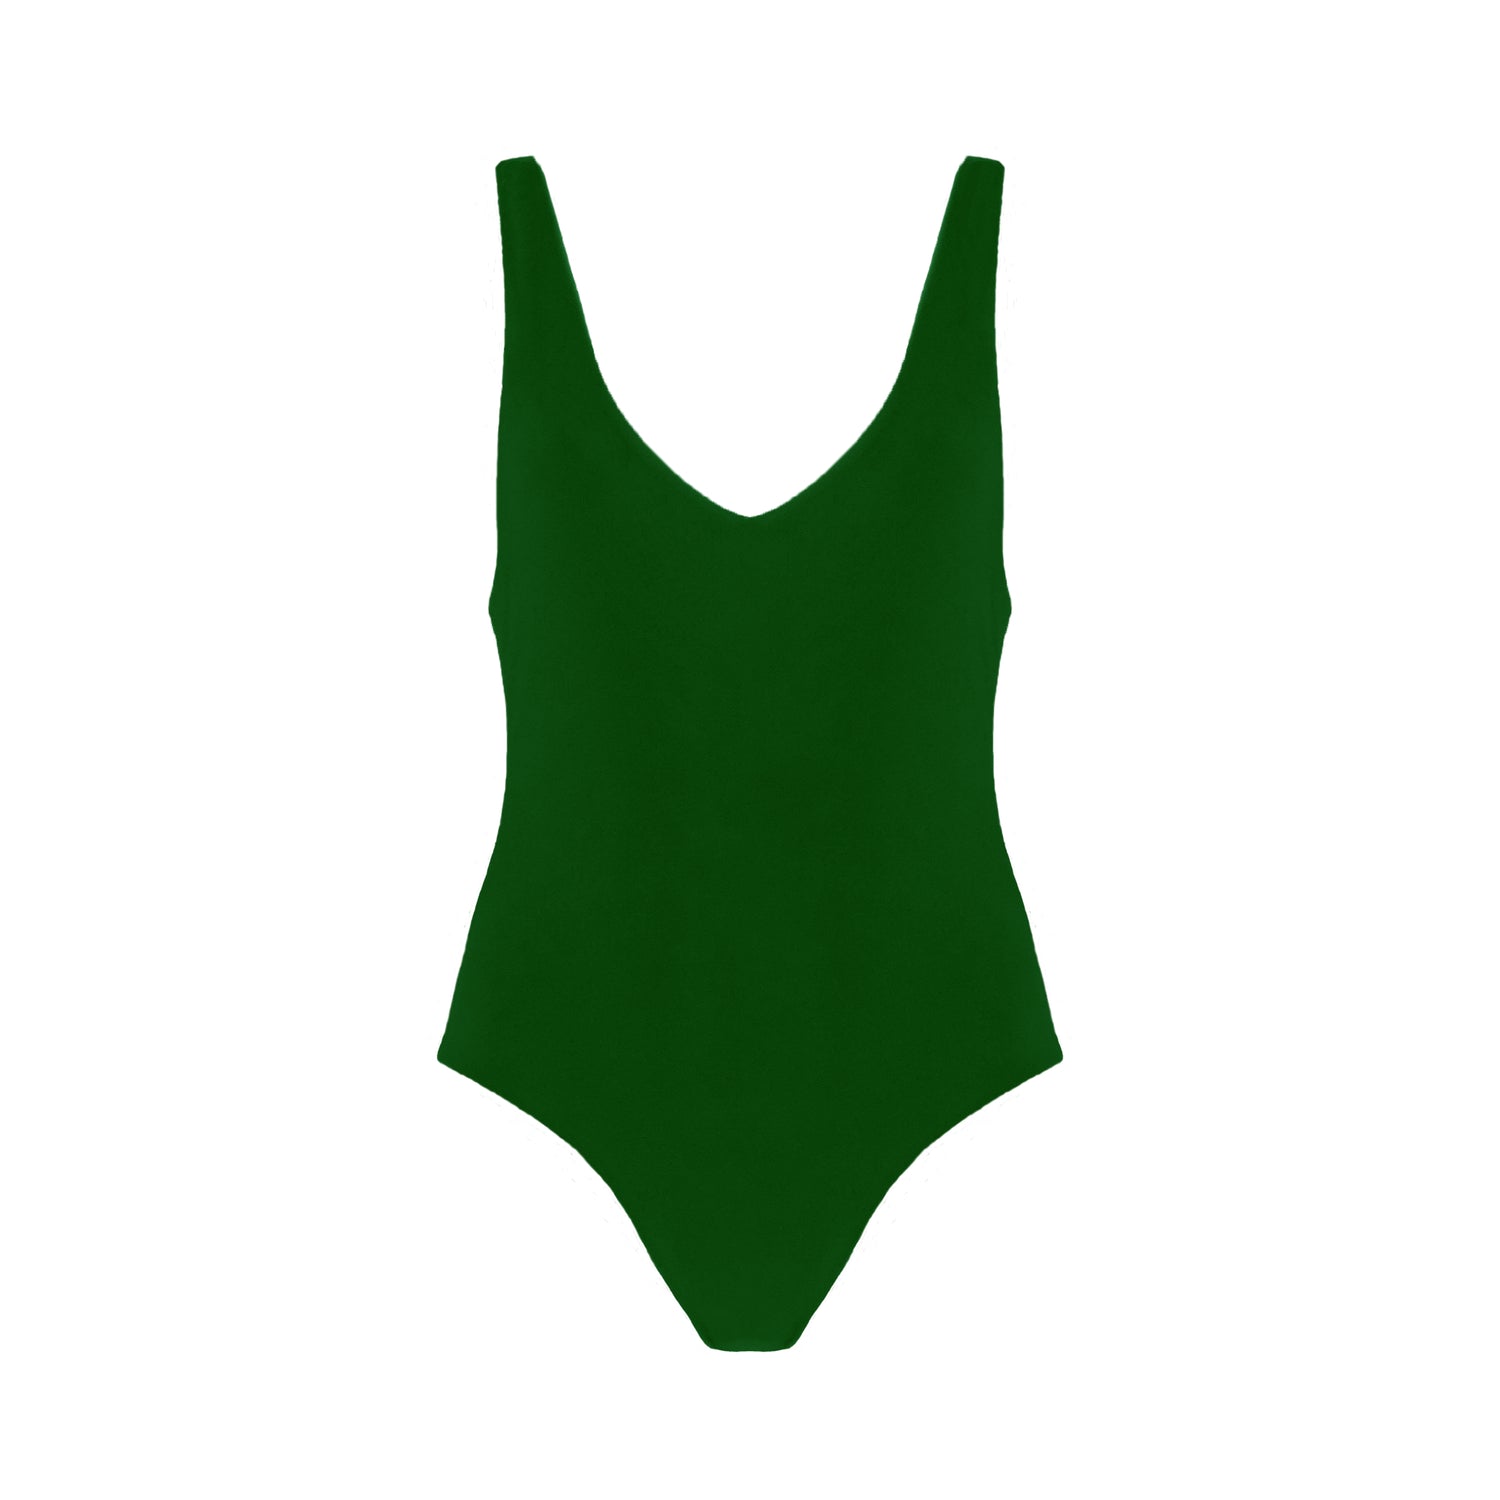 Forest green plunging v-neck one piece swimsuit with low back, high cut legs, and cheeky bum coverage.